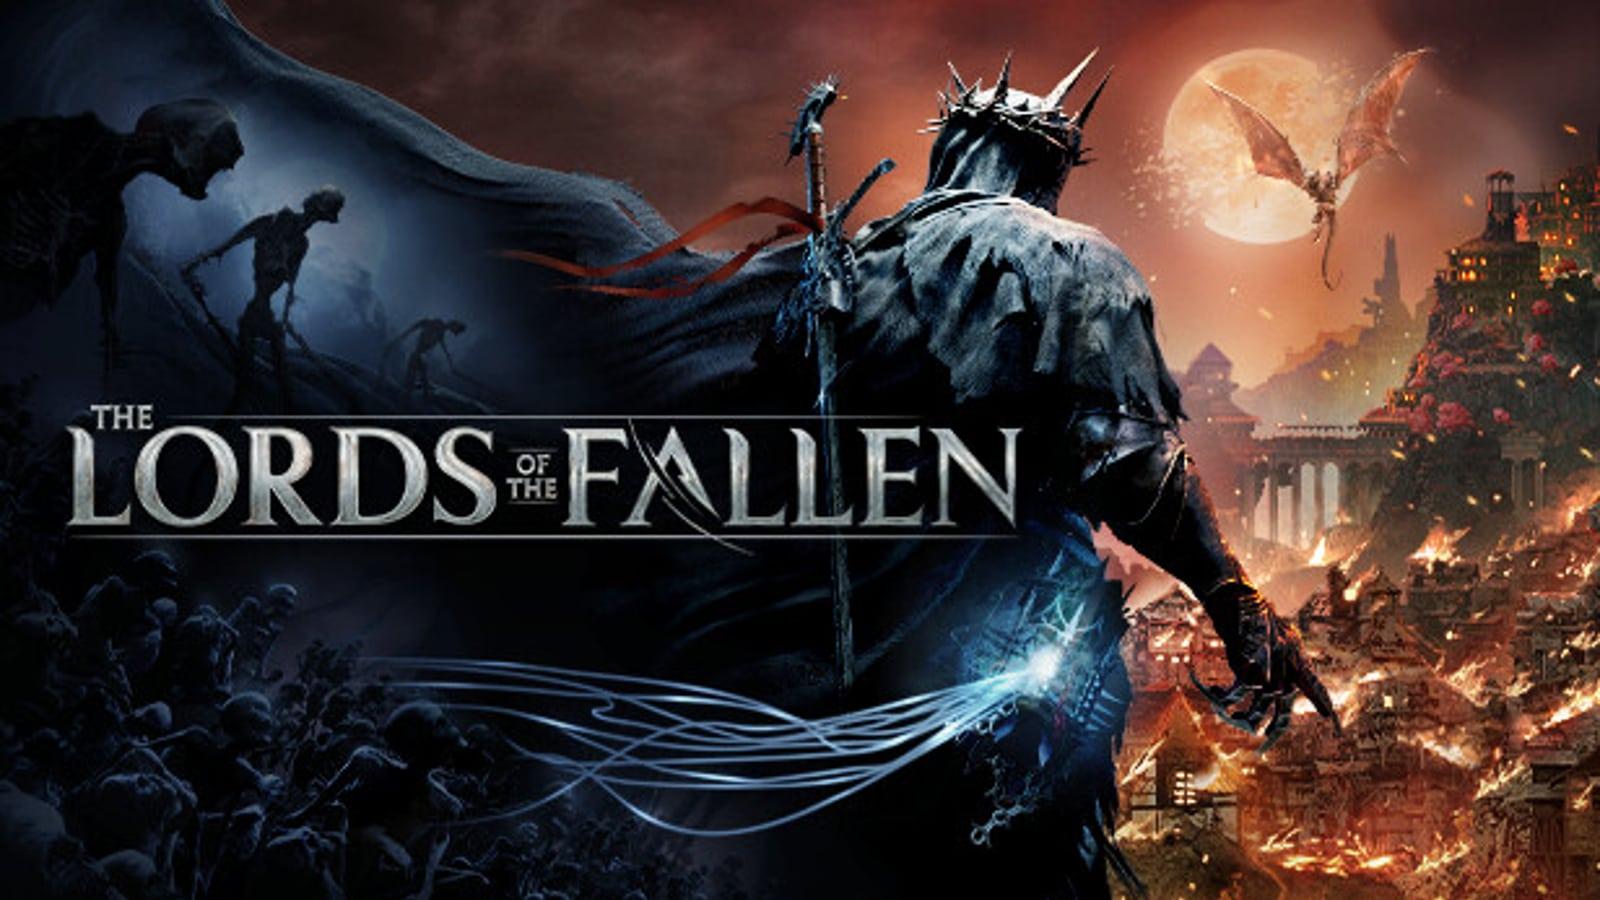 The lords of the fallen 2